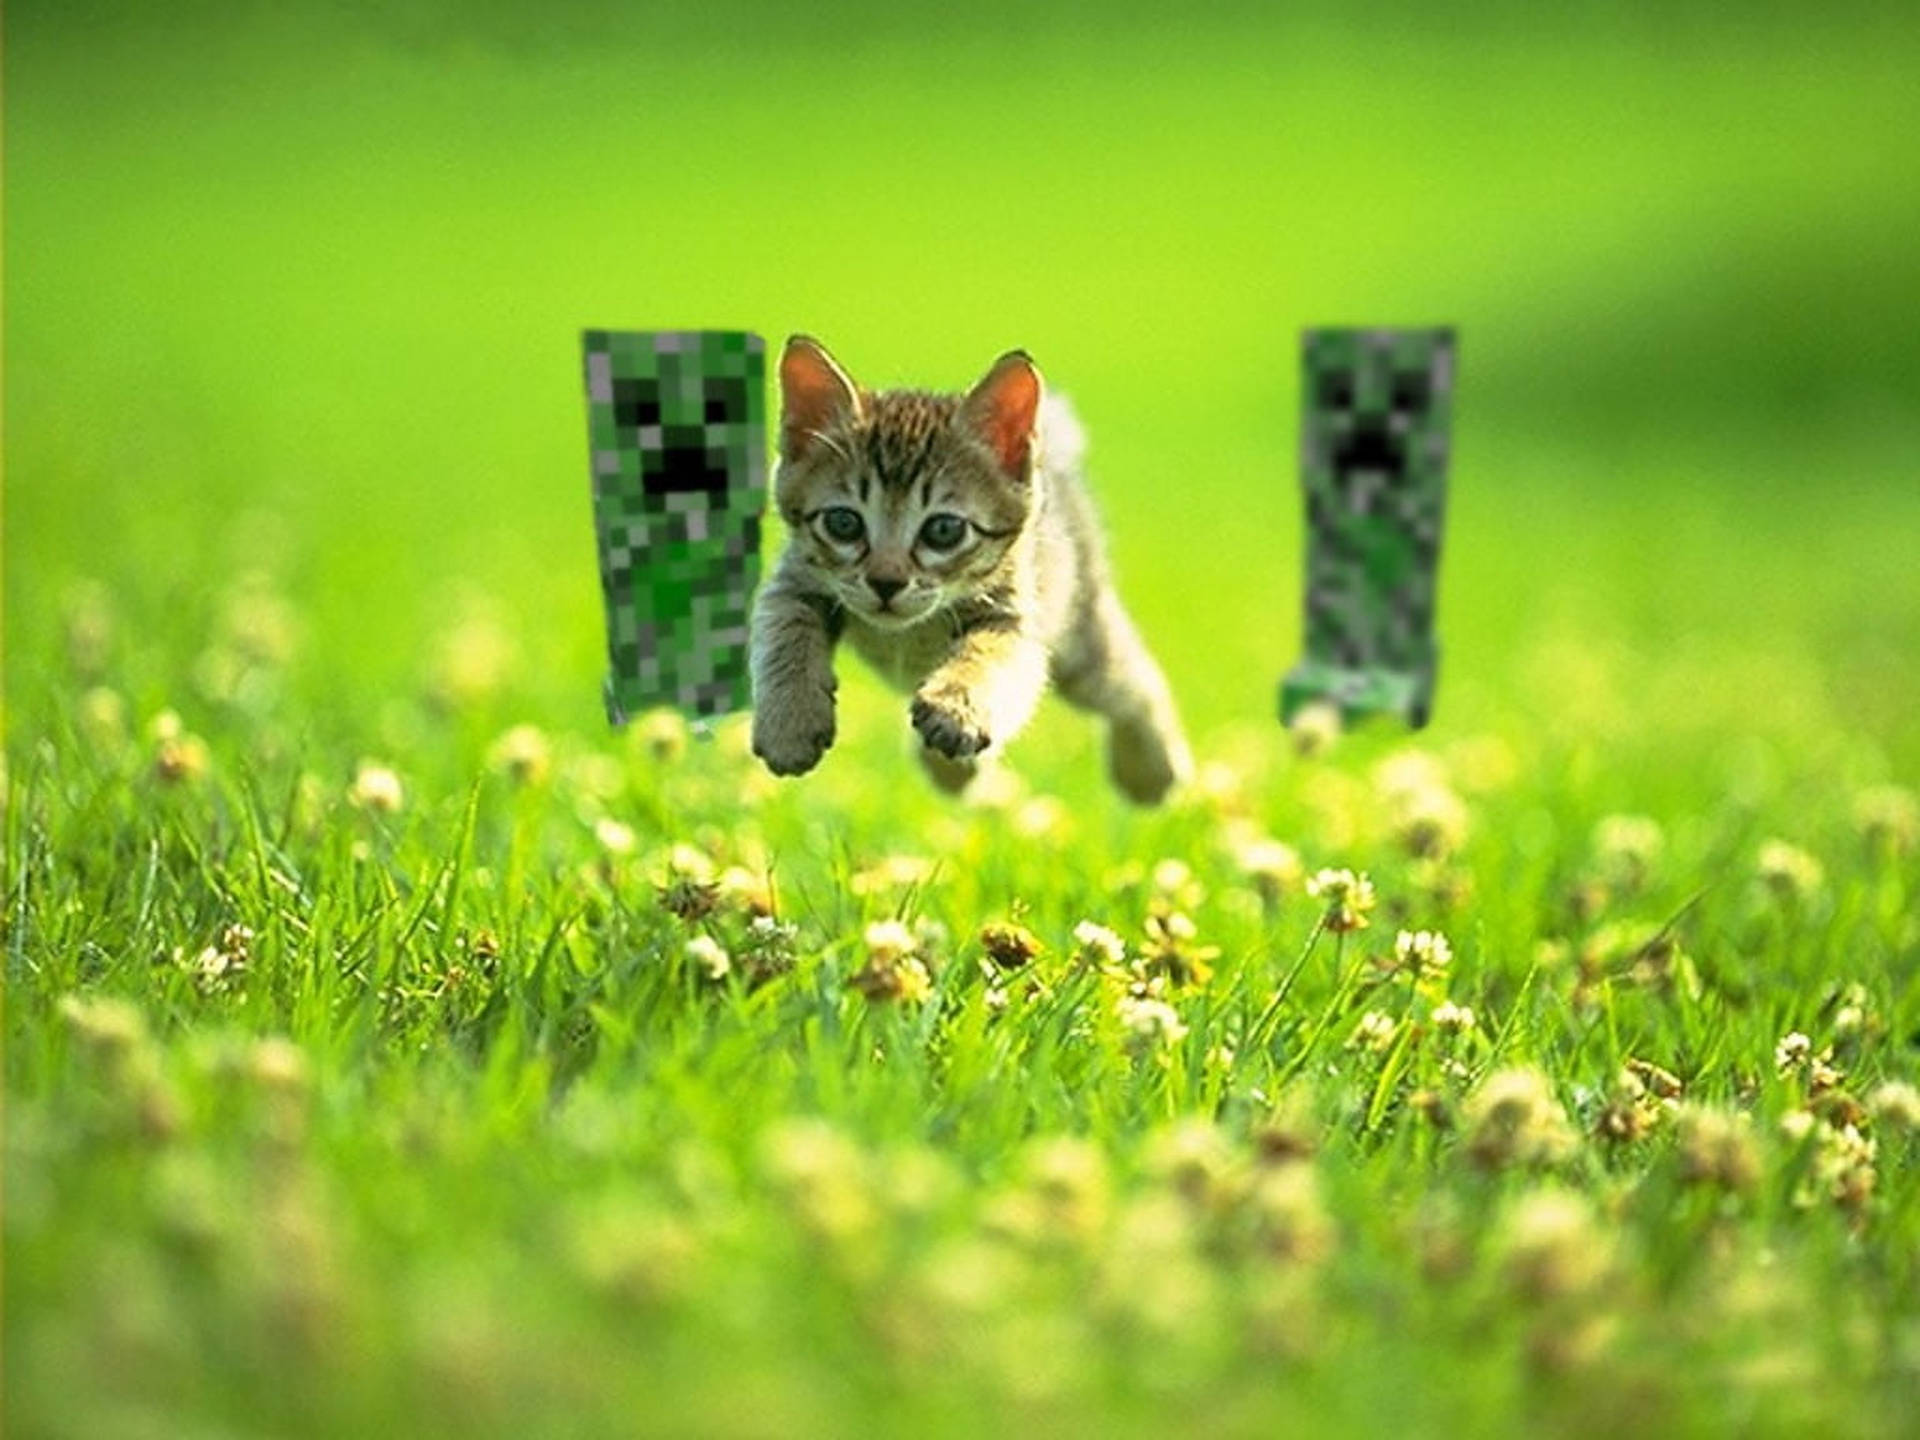 Minecraft Creepers With Cat Wallpaper